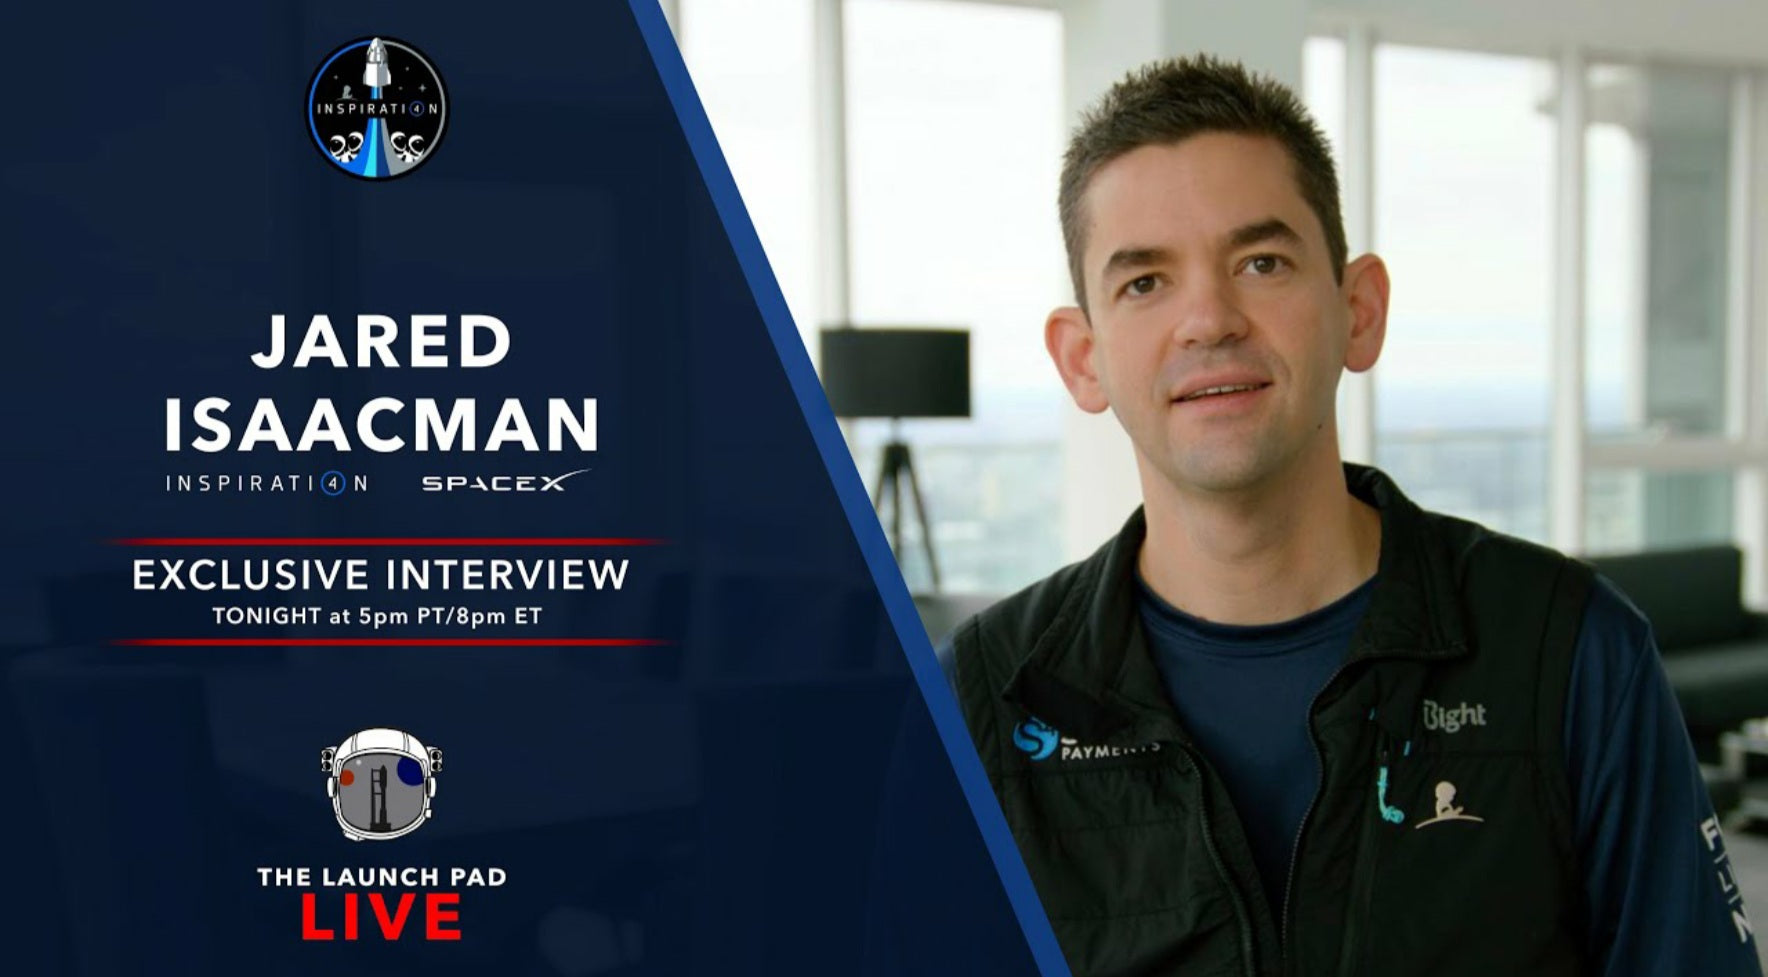 Jared Isaacman discusses upcoming Inspiration4 Mission aboard SpaceX's Crew Dragon [VIDEO]